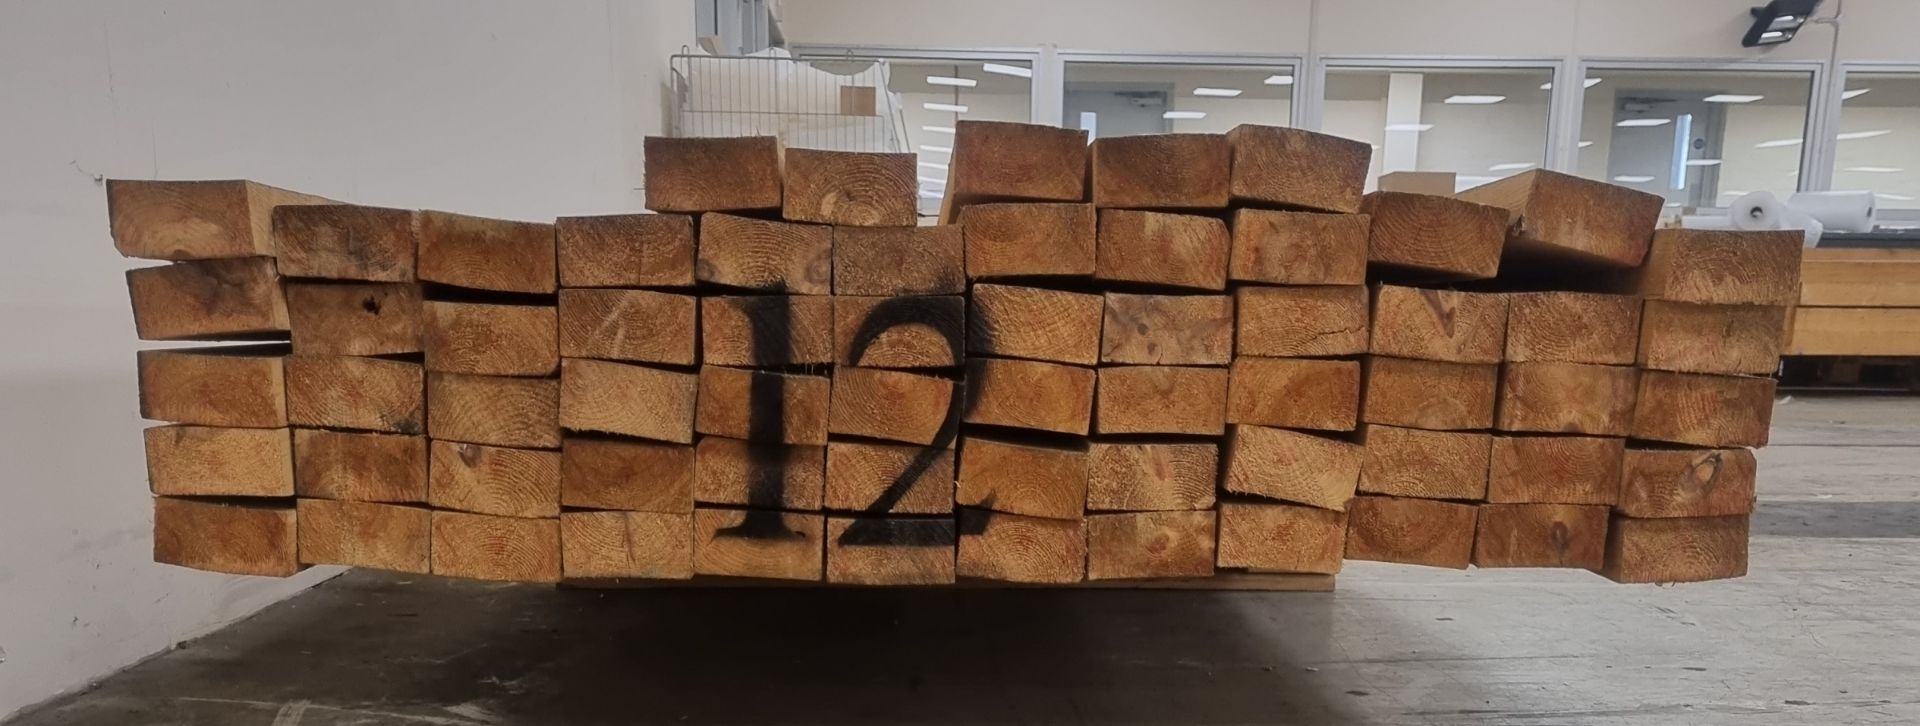 Pallet of 4"x2" (10x5cm) softwood, heat treated and debarked (GBFC-0452 DBHT) - L450cm - 65 pieces - Image 4 of 5